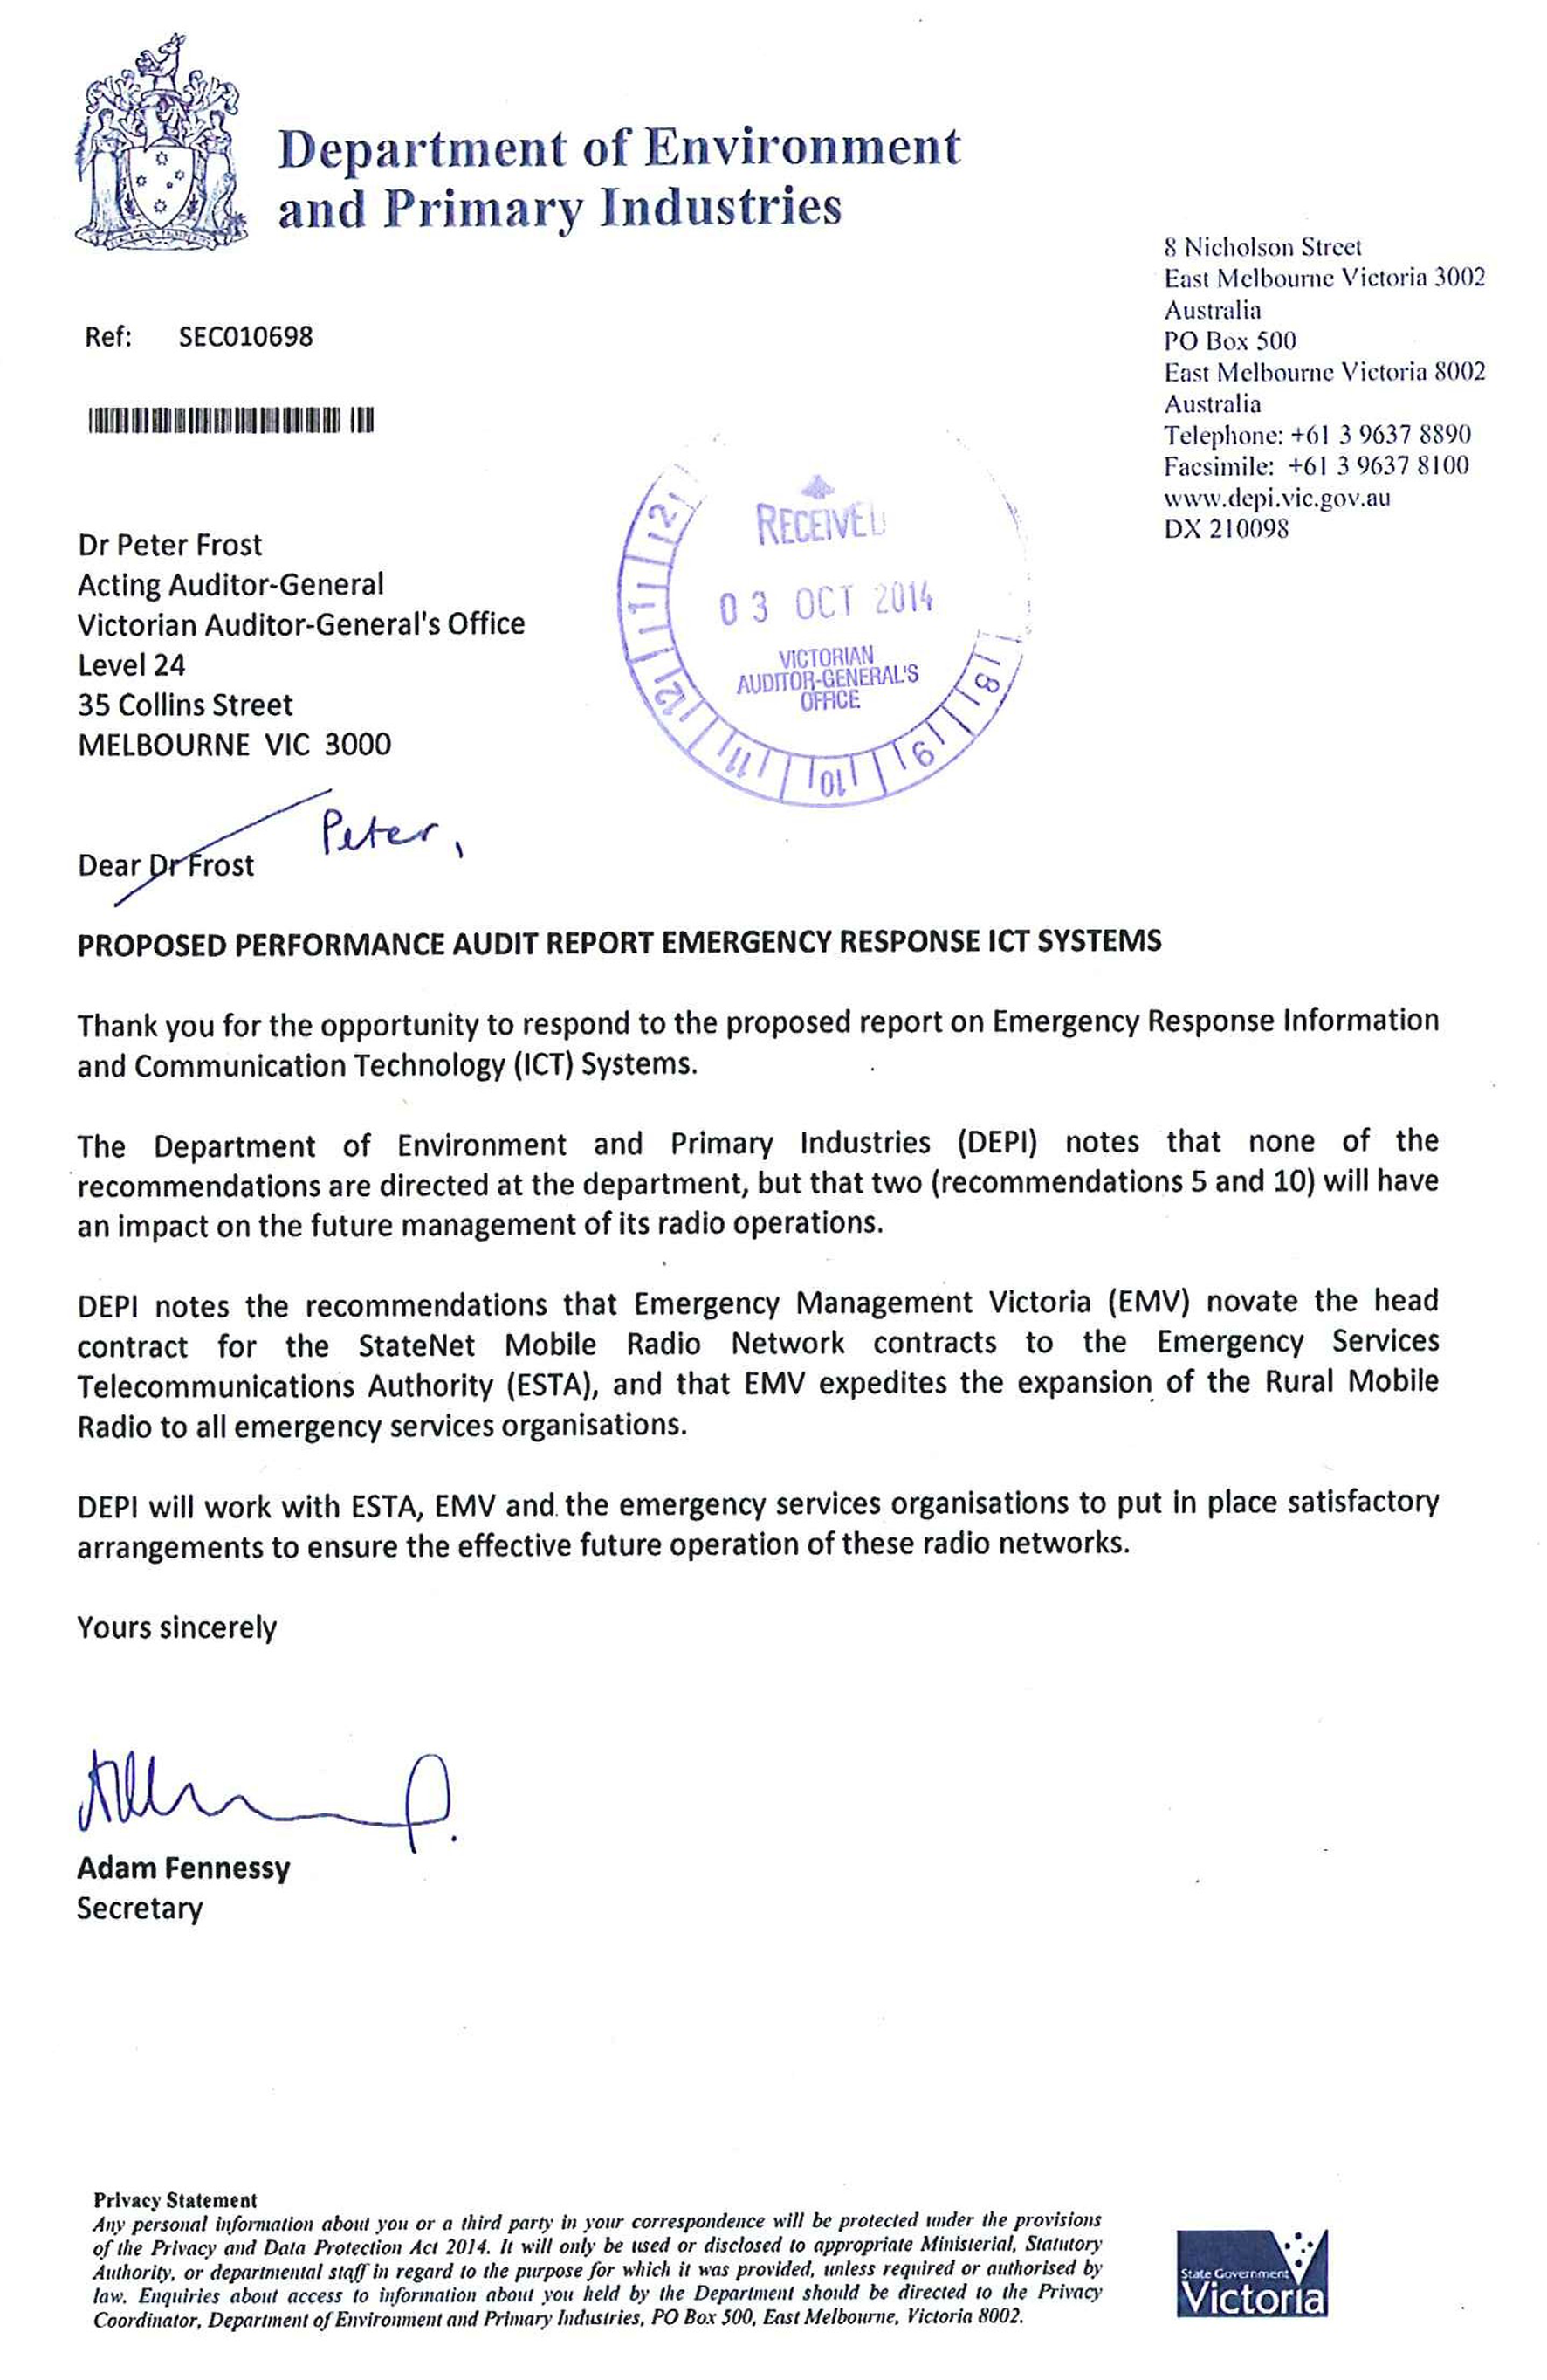 Image shows response provided by the Secretary, Department of Environment and Primary Industries